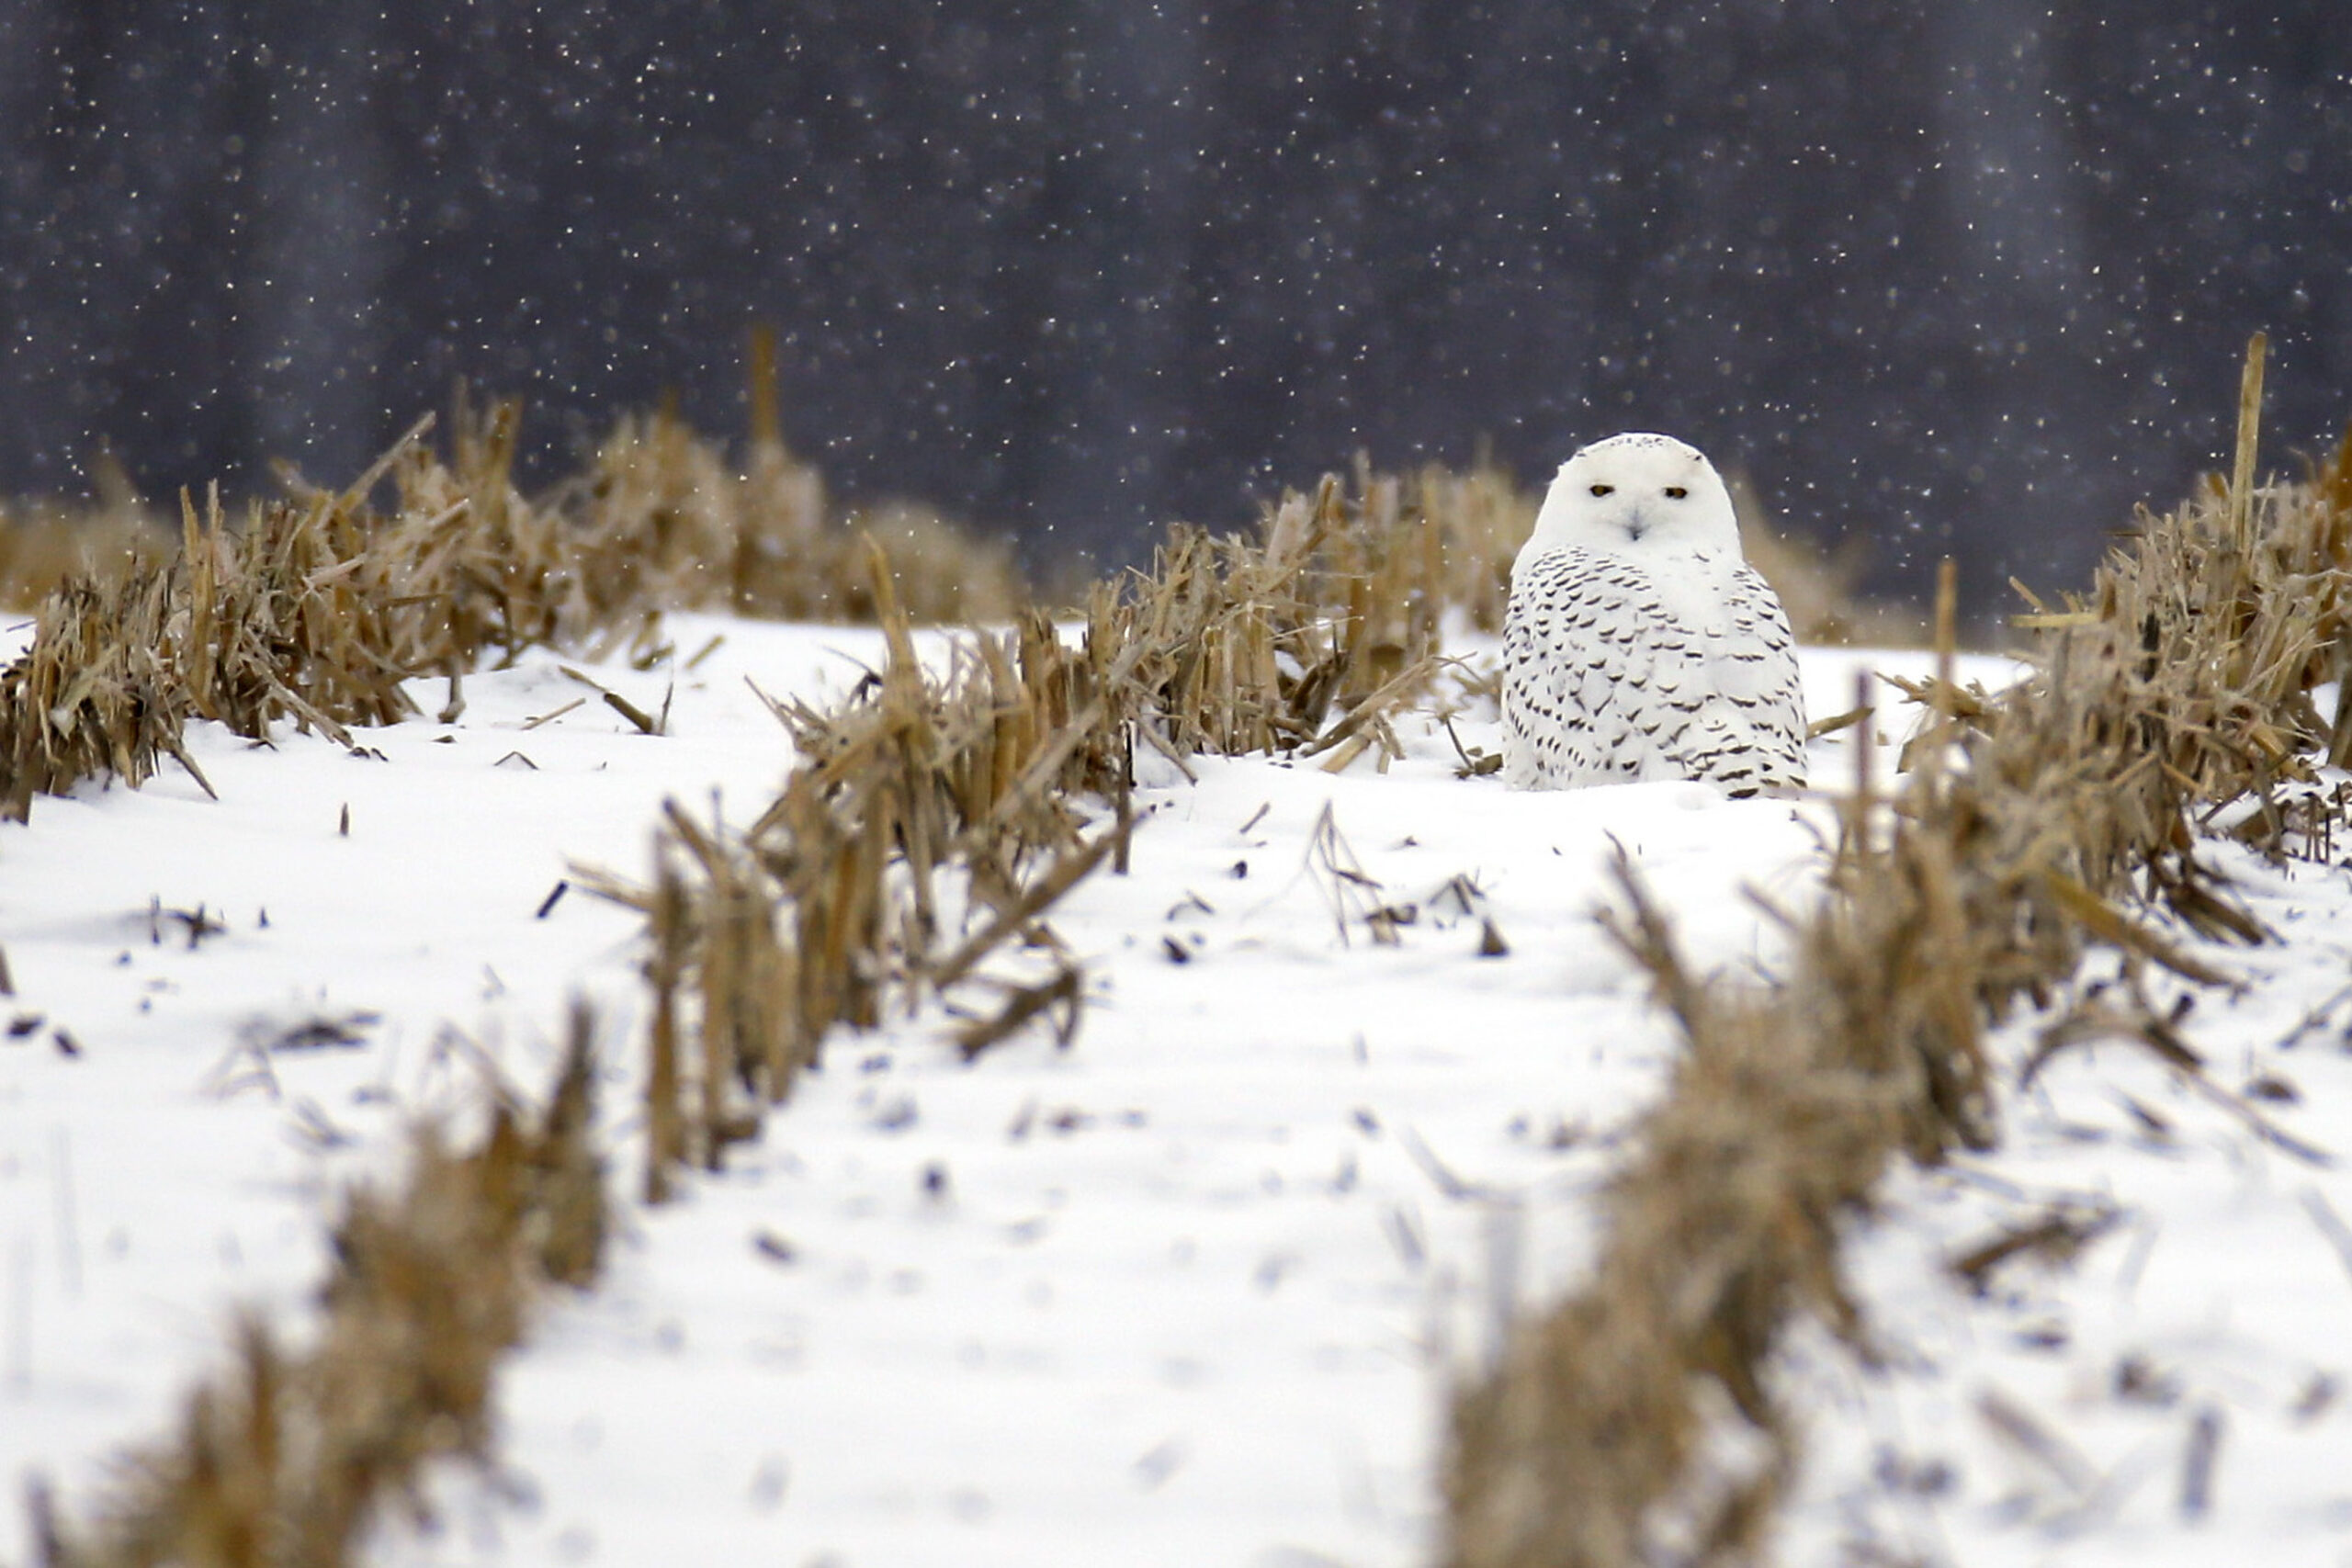 A white snowy owl sits in the snow in a field